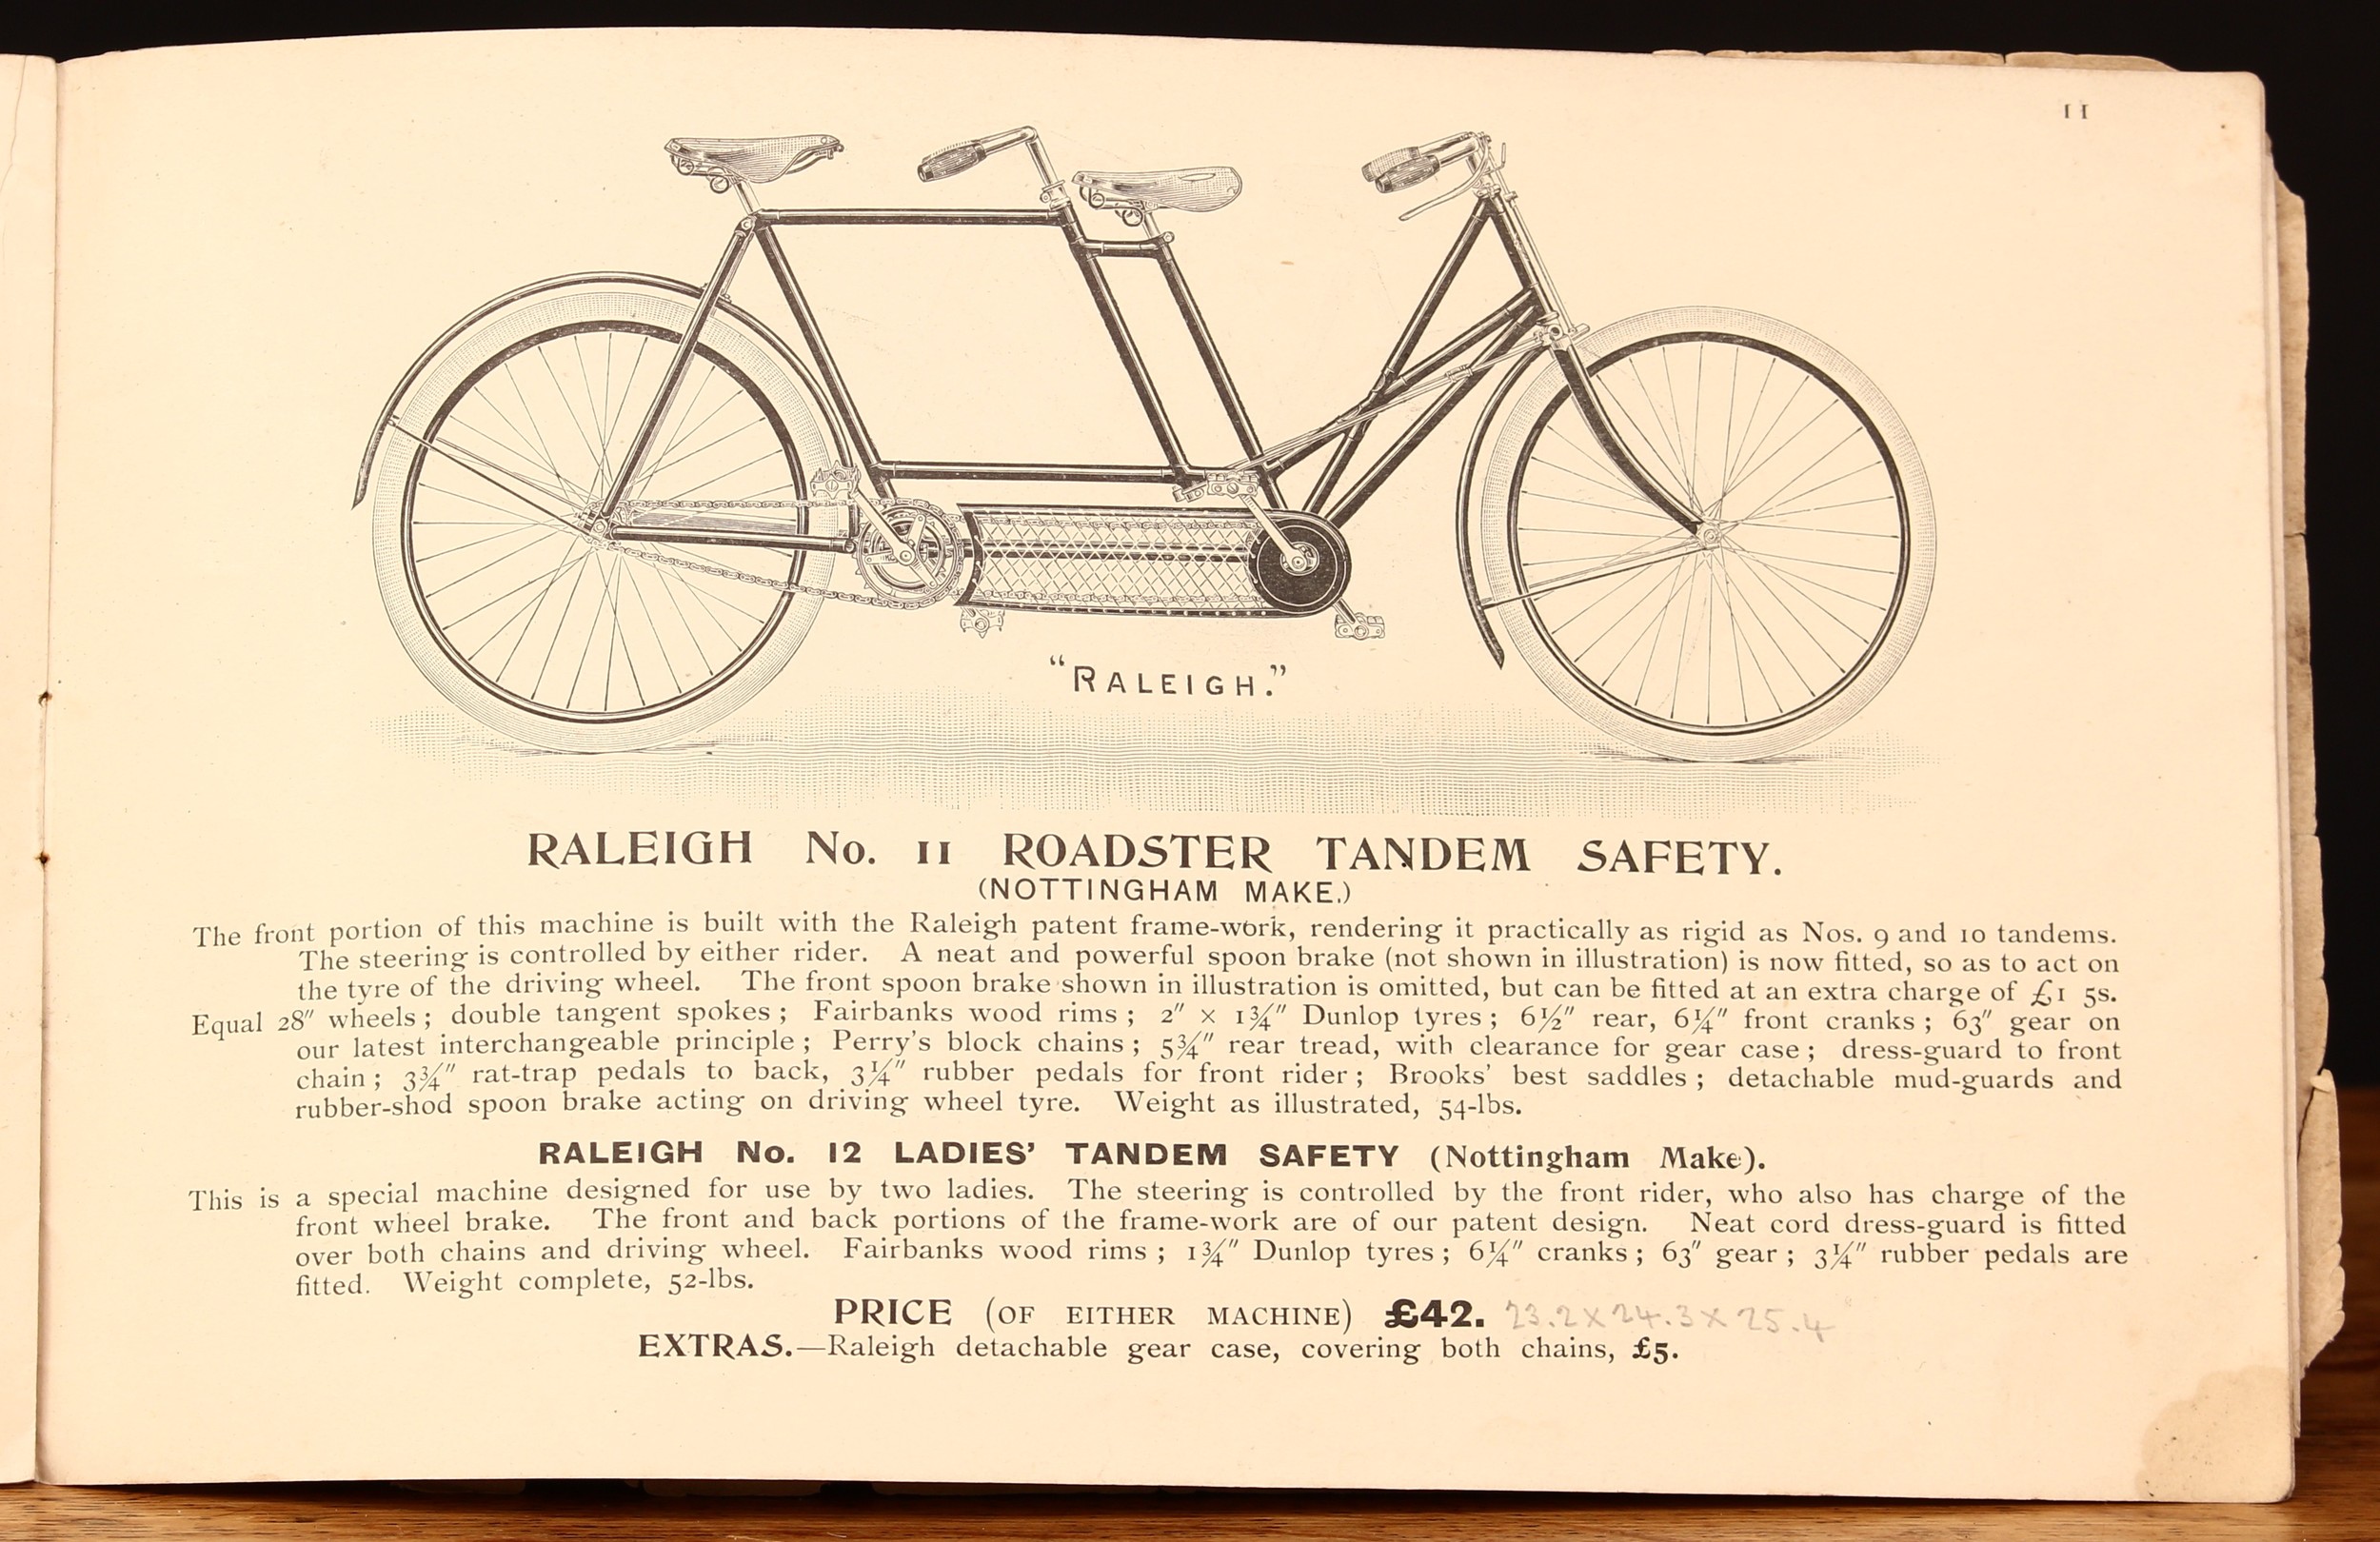 Sport & Advertising, Cycling, Raleigh/Lenton Raleigh - The Raleigh Cycle Co. Limited Nottingham 1896 - Bild 2 aus 3